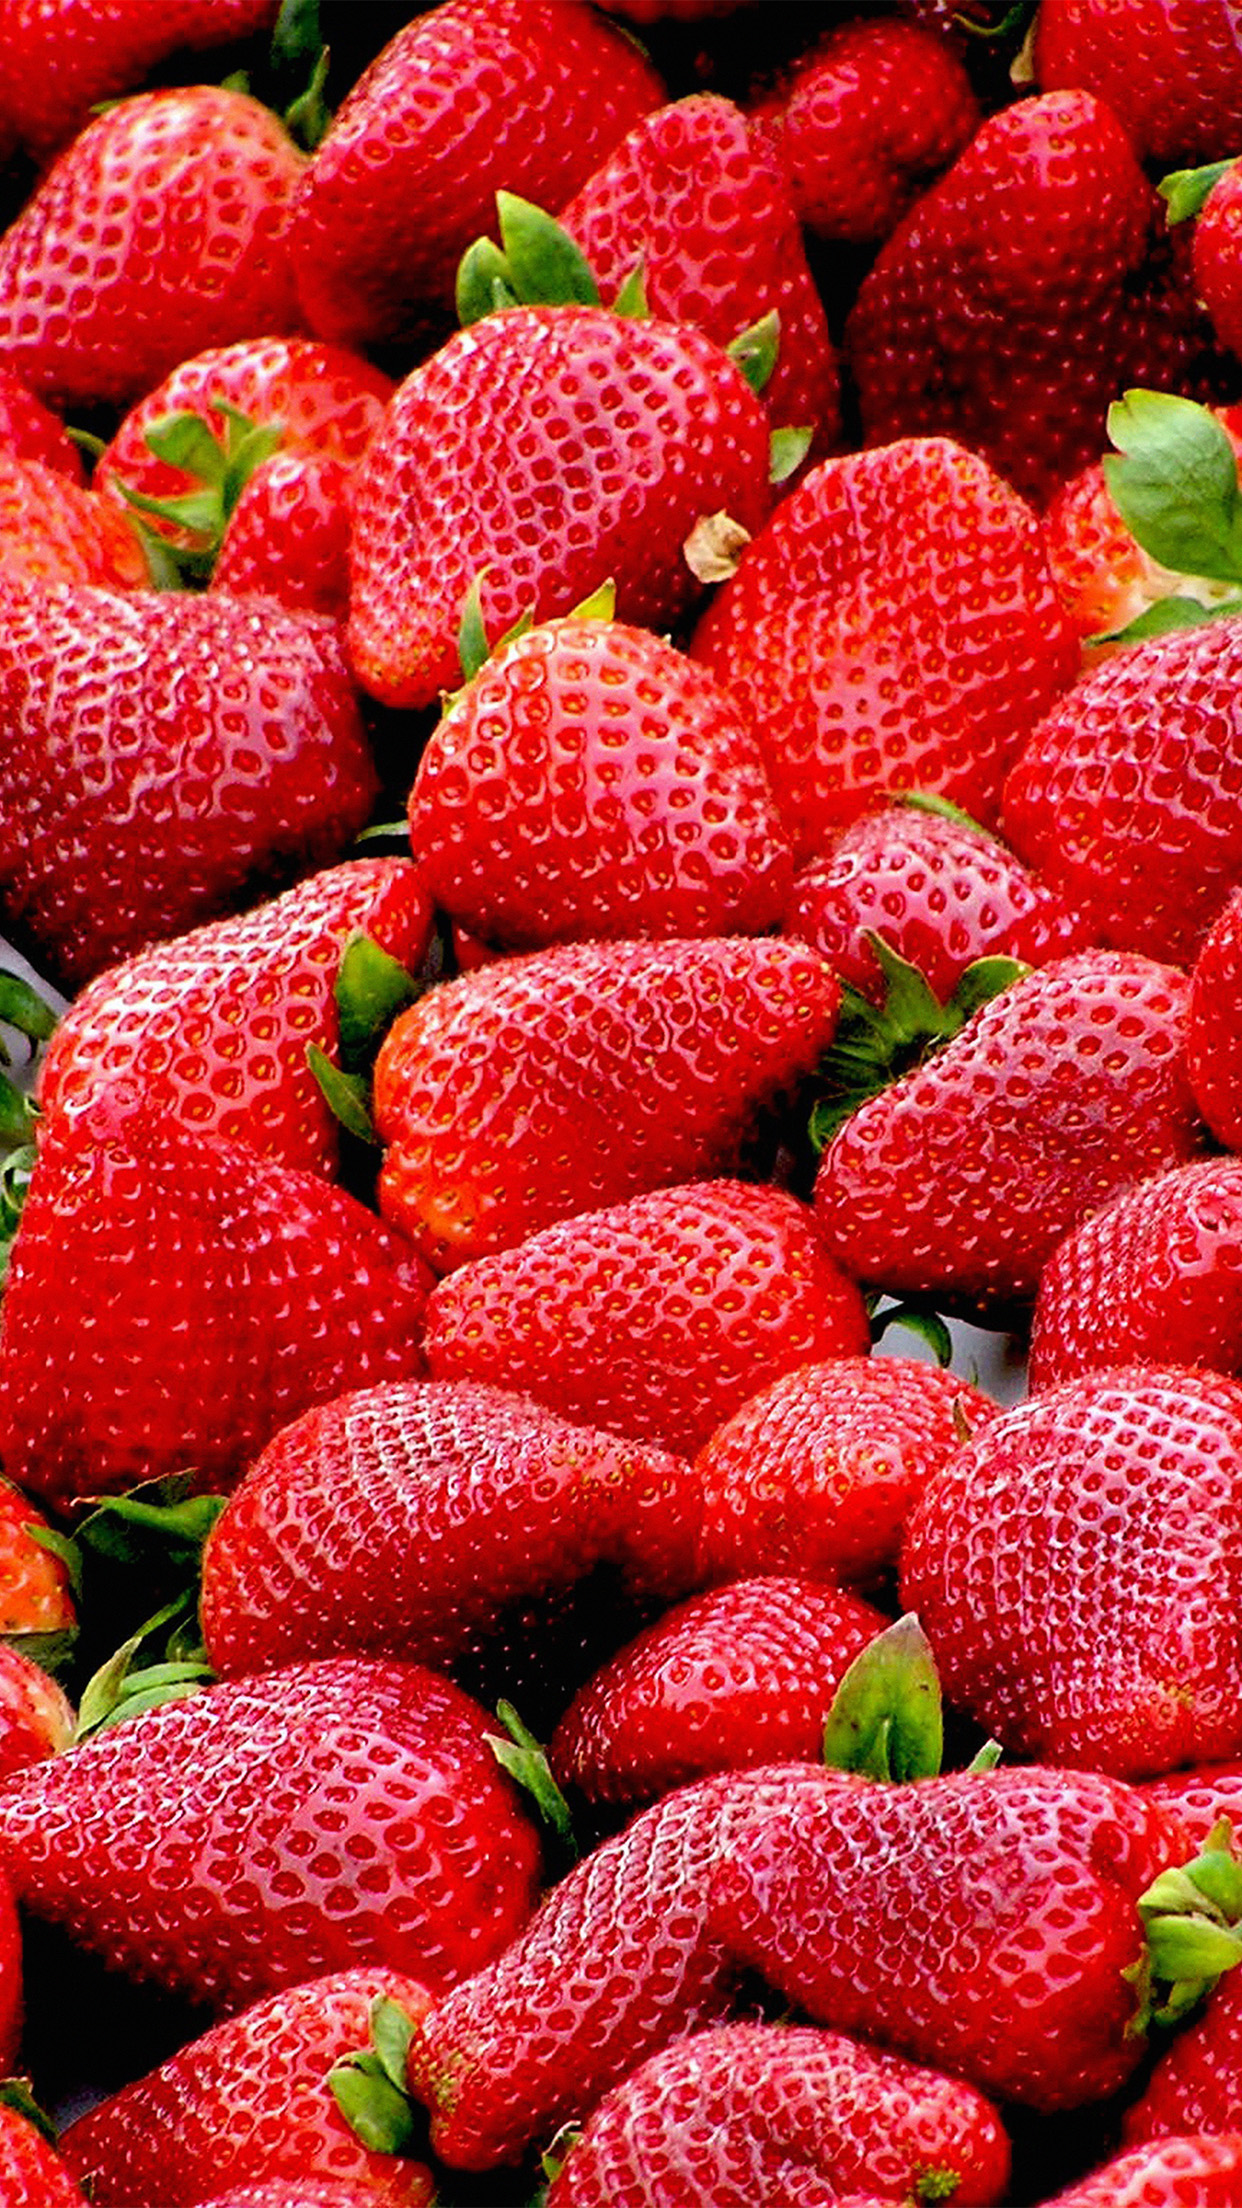 strawberry wallpaper for iphone,natural foods,strawberry,strawberries,fruit,local food